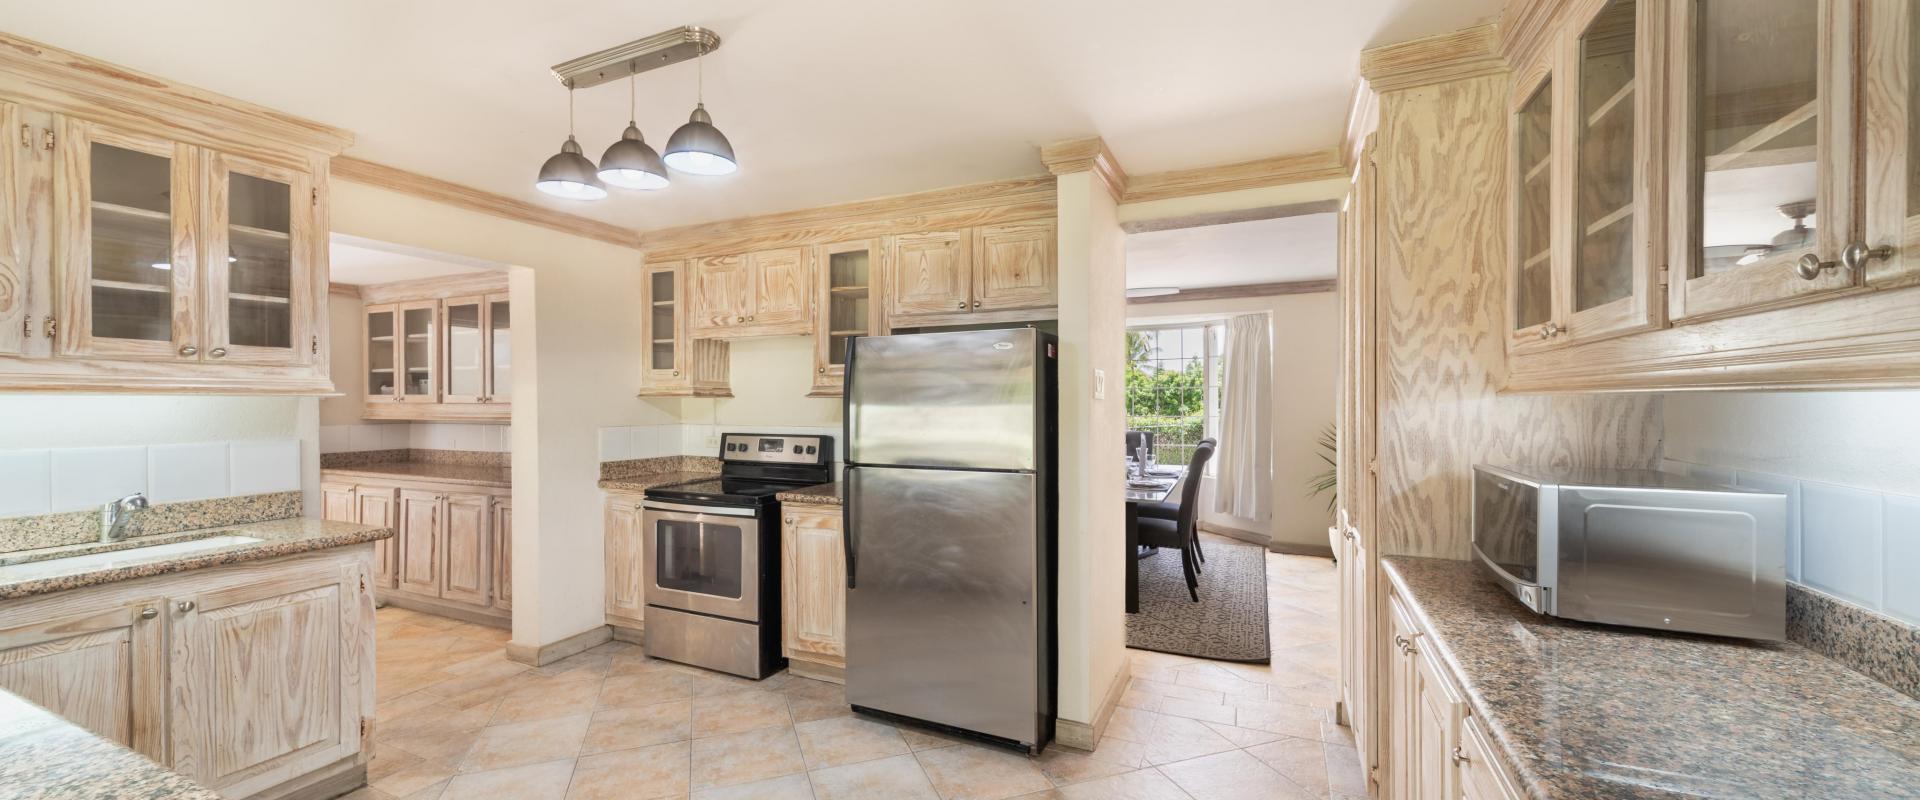 149 Salters Road Barbados Holiday Rental Sandy Lane Barbados Kitchen with Stainless Steel Appliances